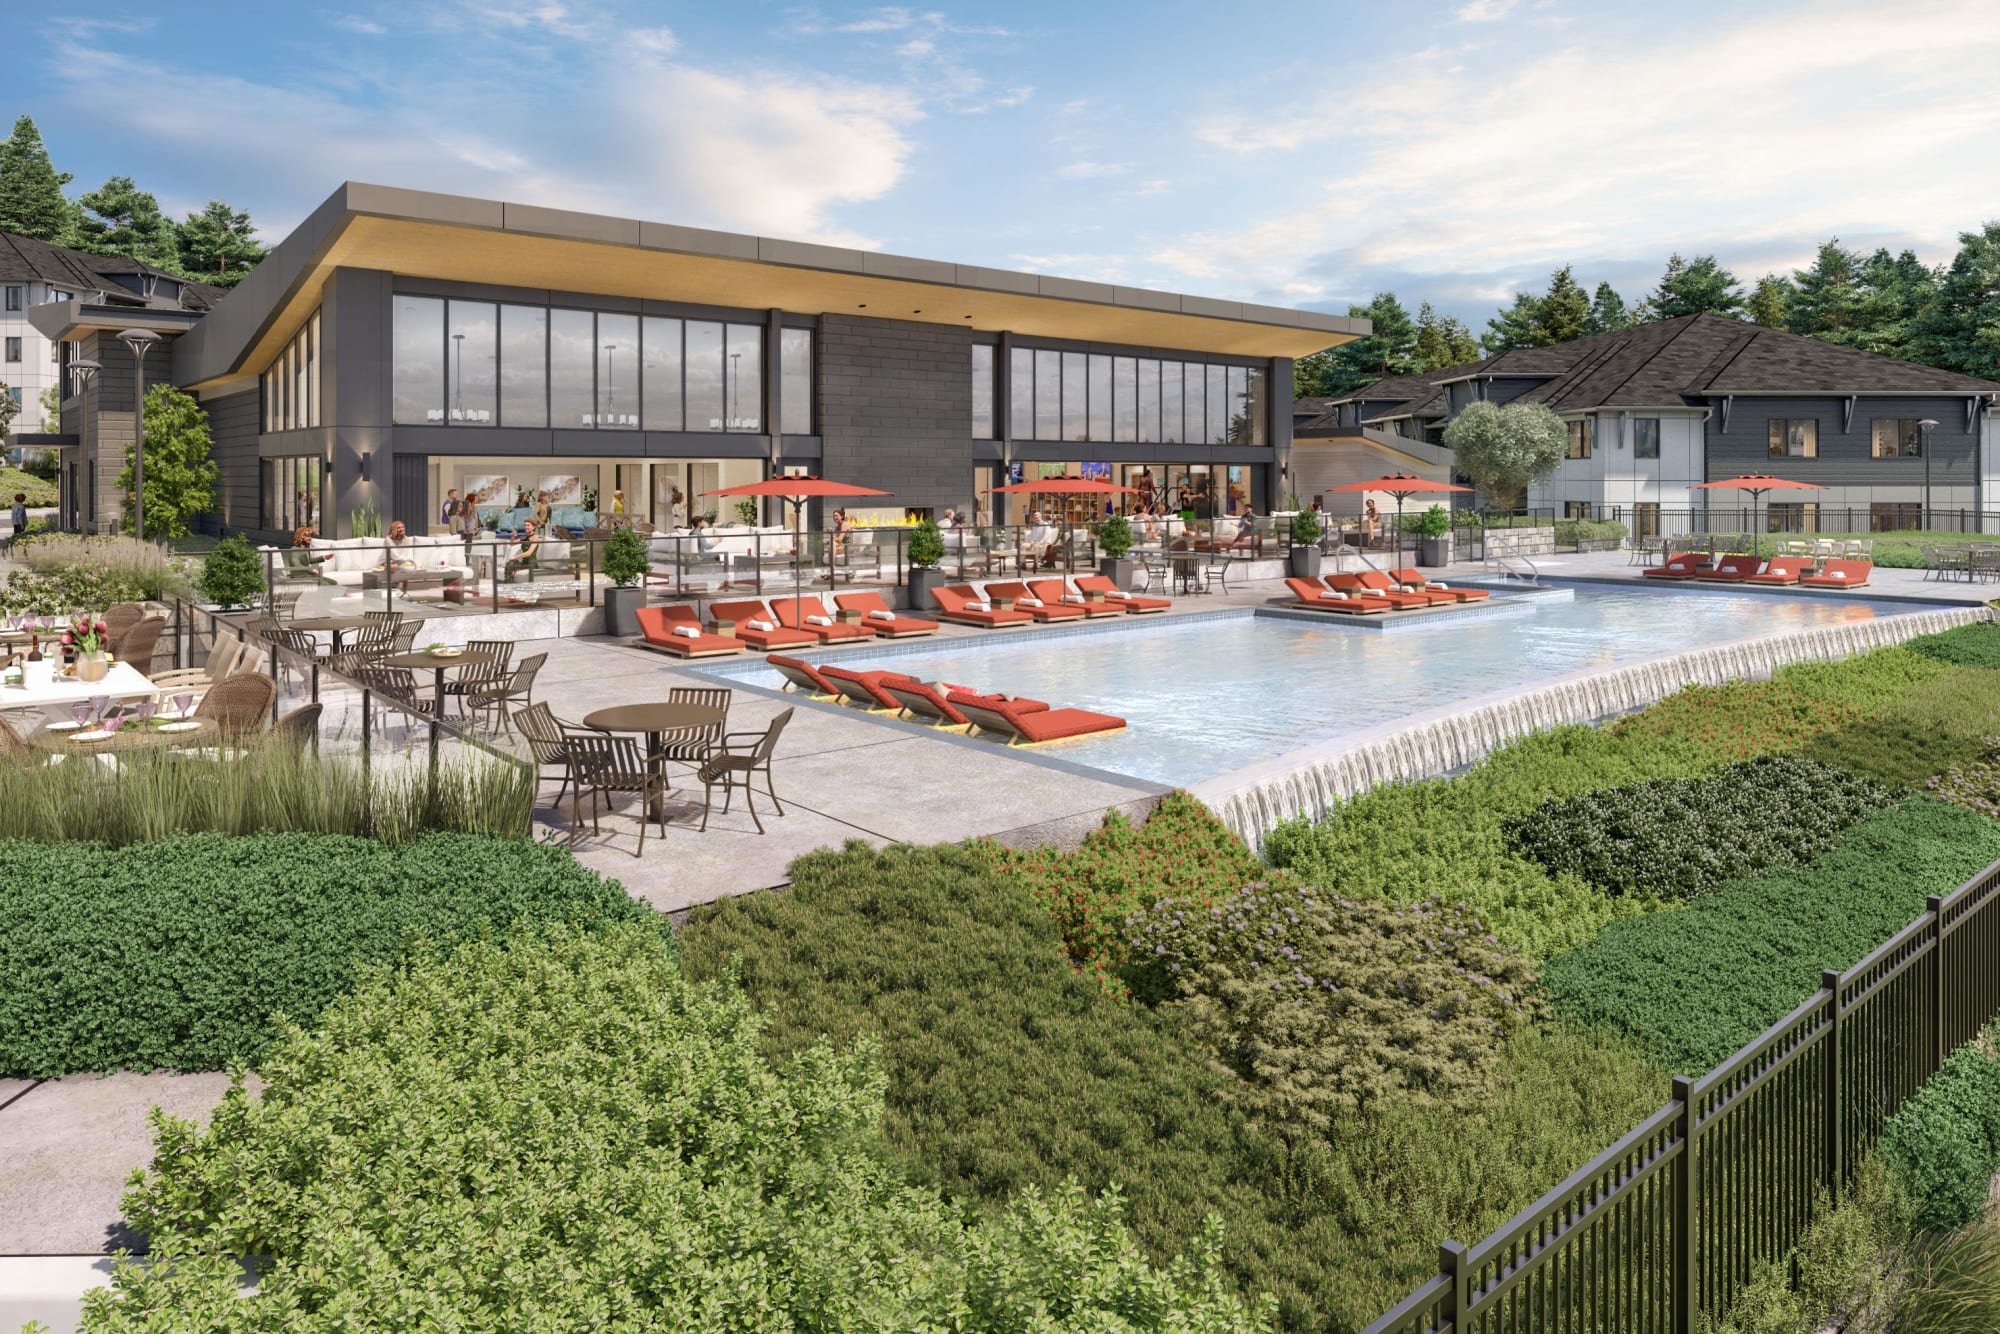 Rendering of the infinite pool at The Highlands at Silverdale in Silverdale, Washington